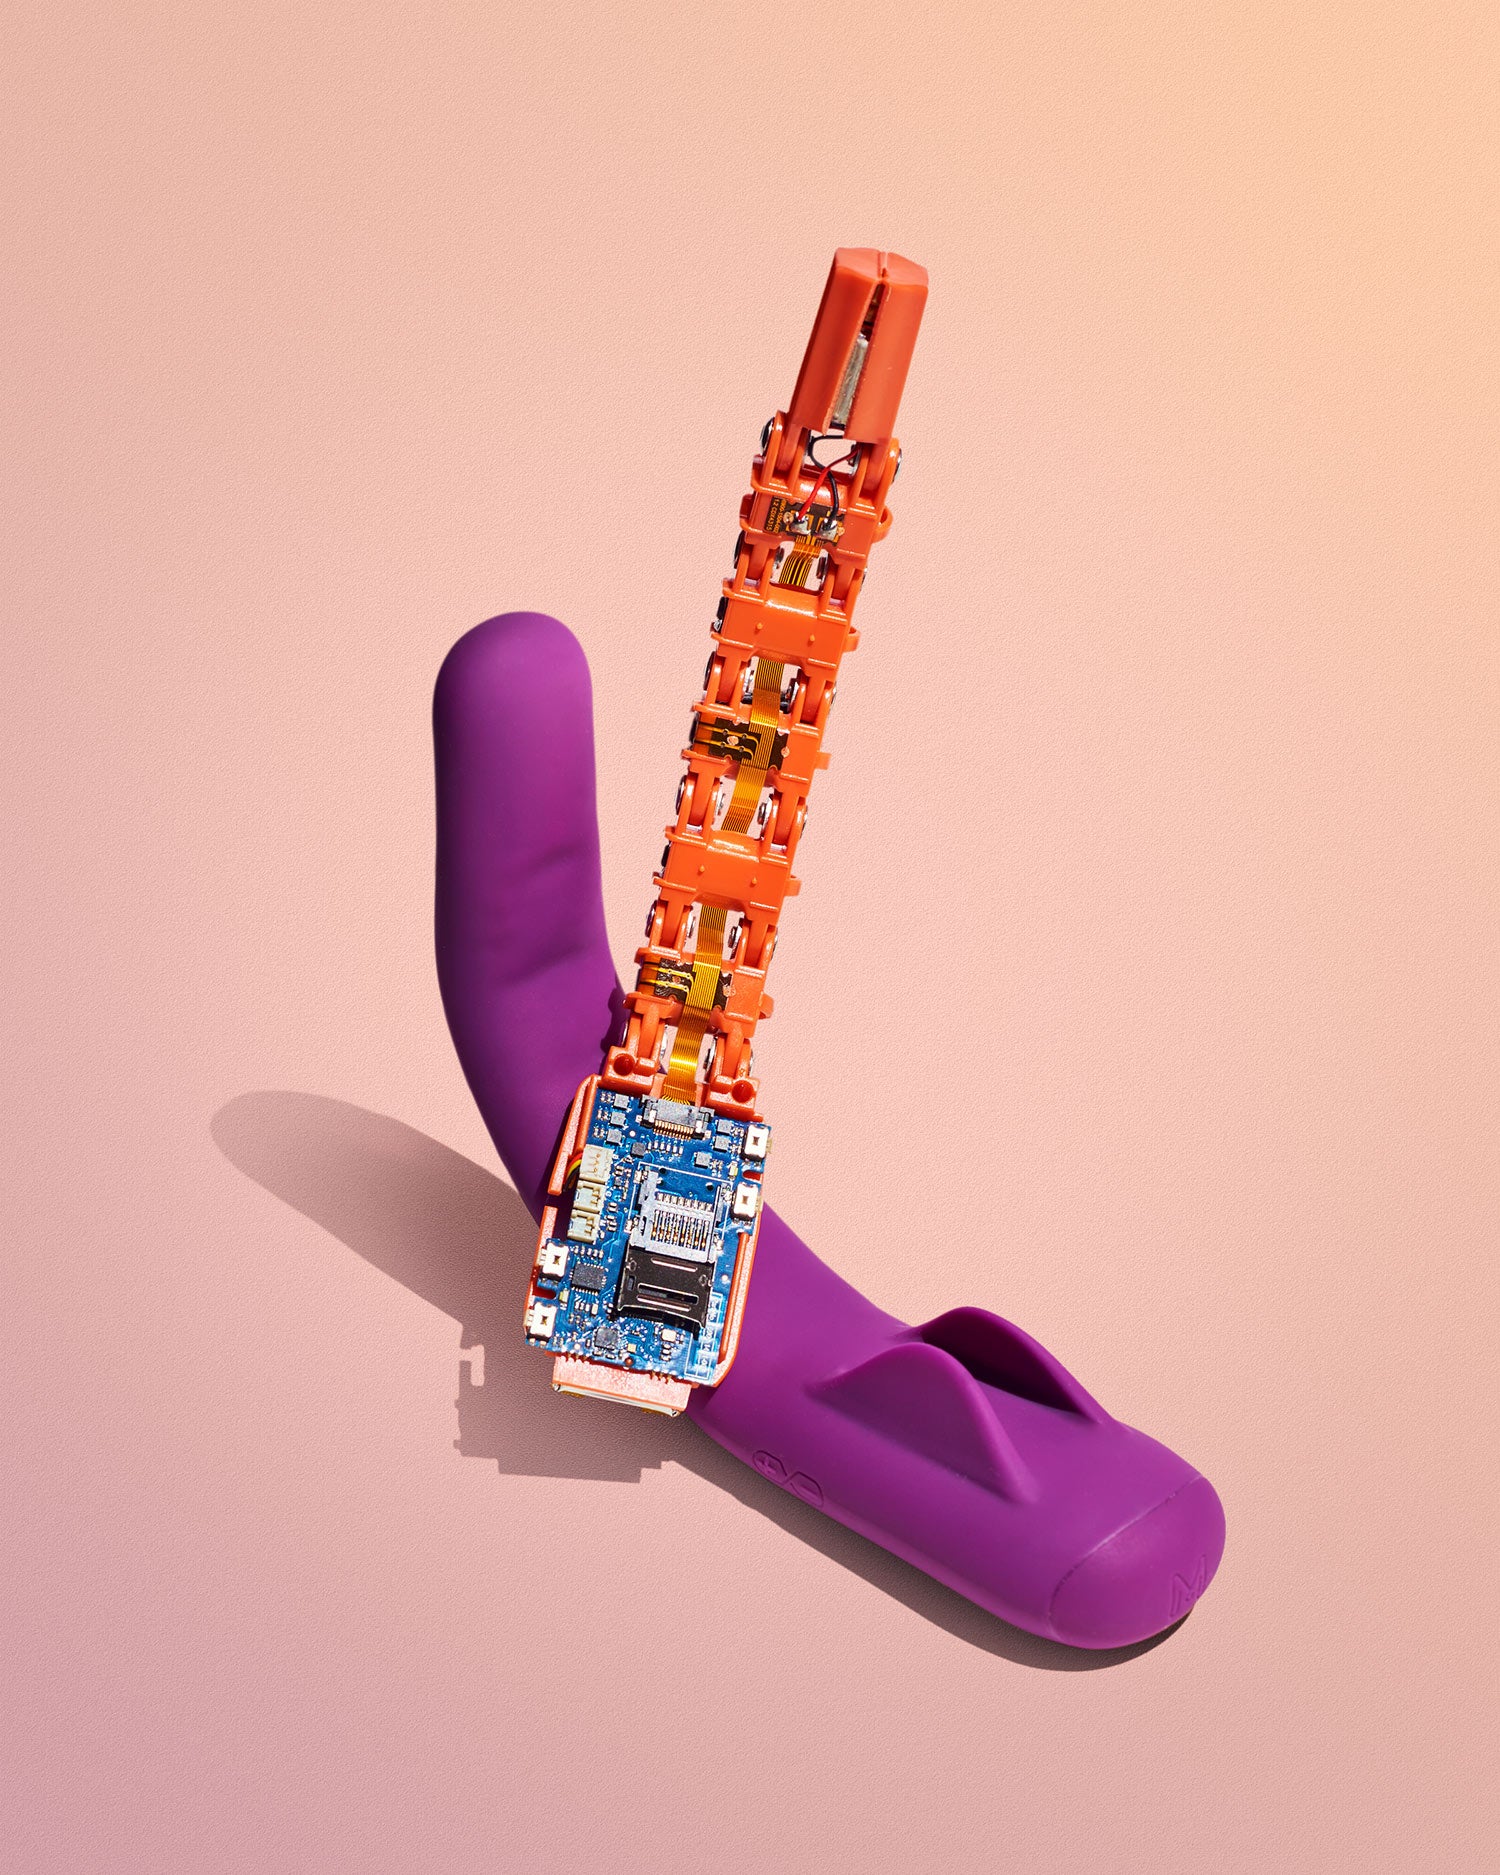 These sex toys are designed to heal, one orgasm at a time